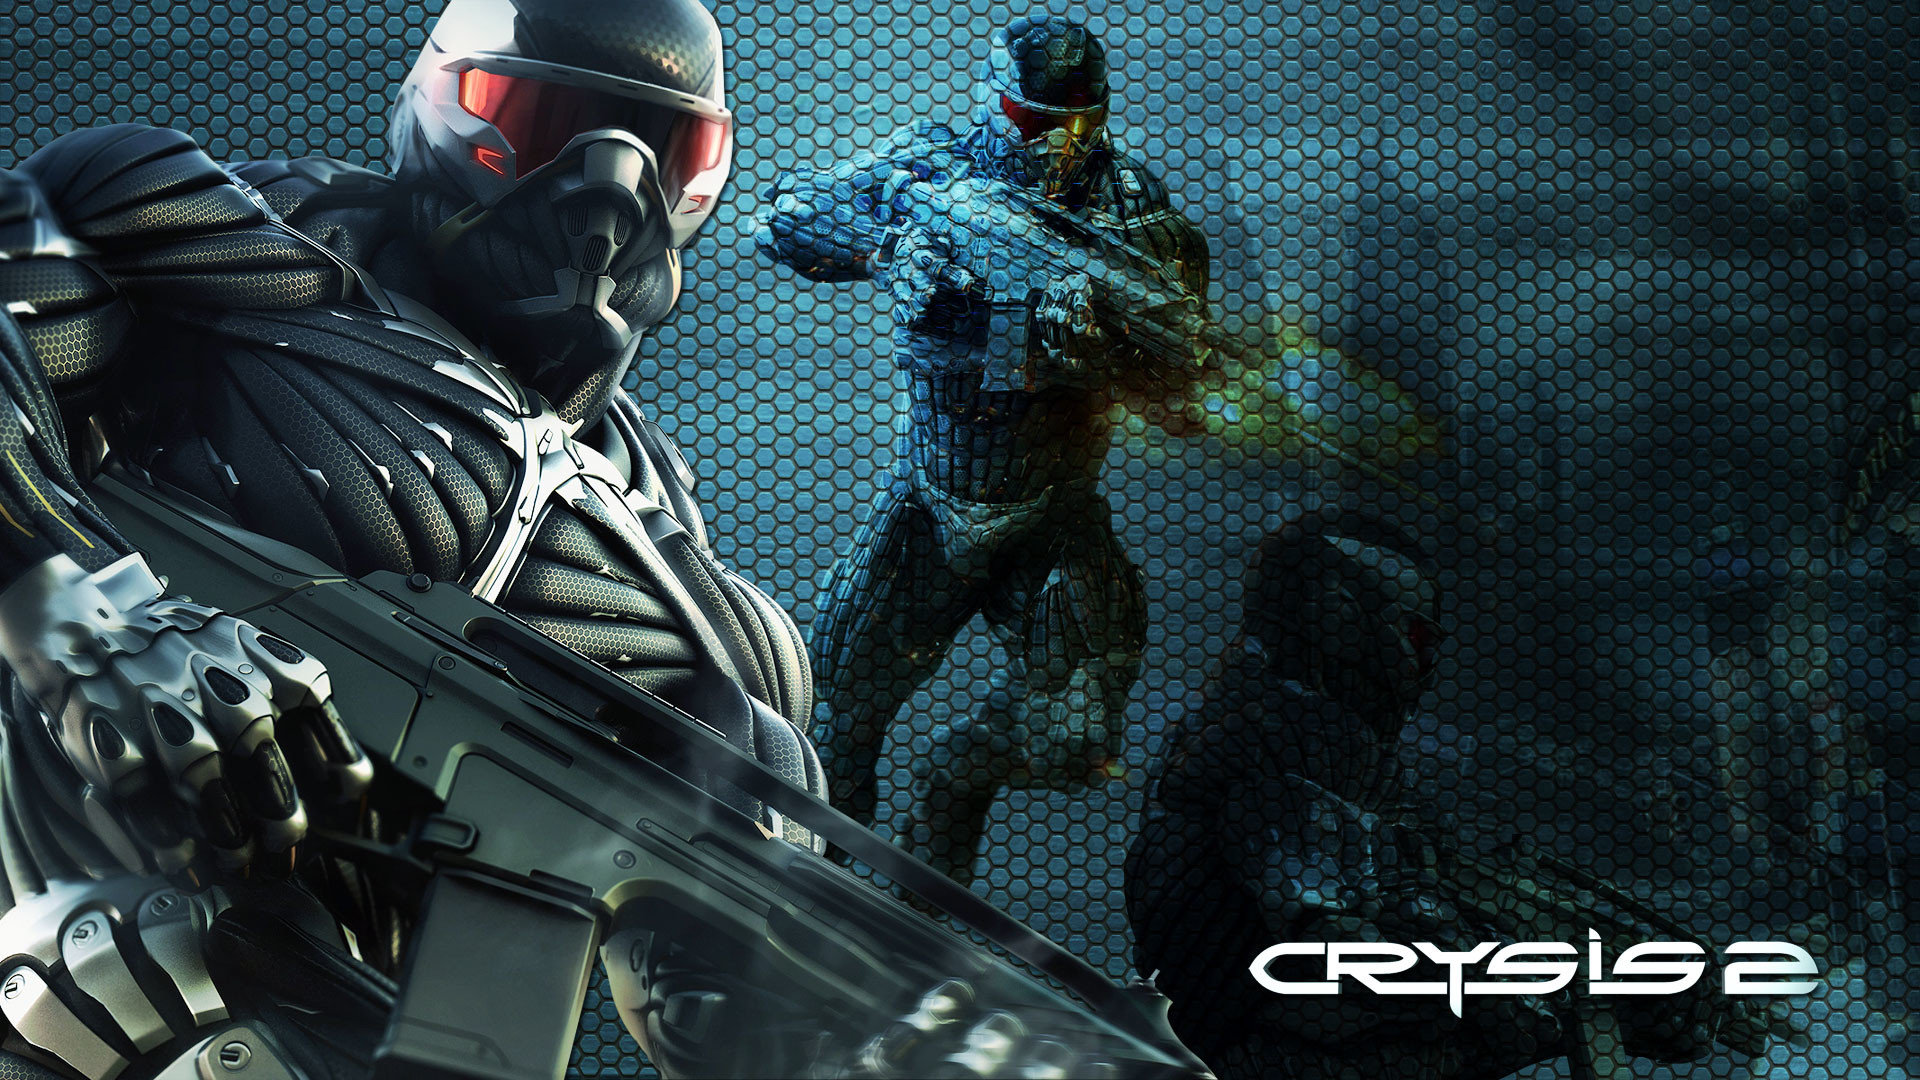 1920x1080 Crysis, High, Definition, Wallpaper, For, Desktop, Background, Download,  Crysis, Photos, Download Wallpaper, Iphone Background Images, Colorful, ...